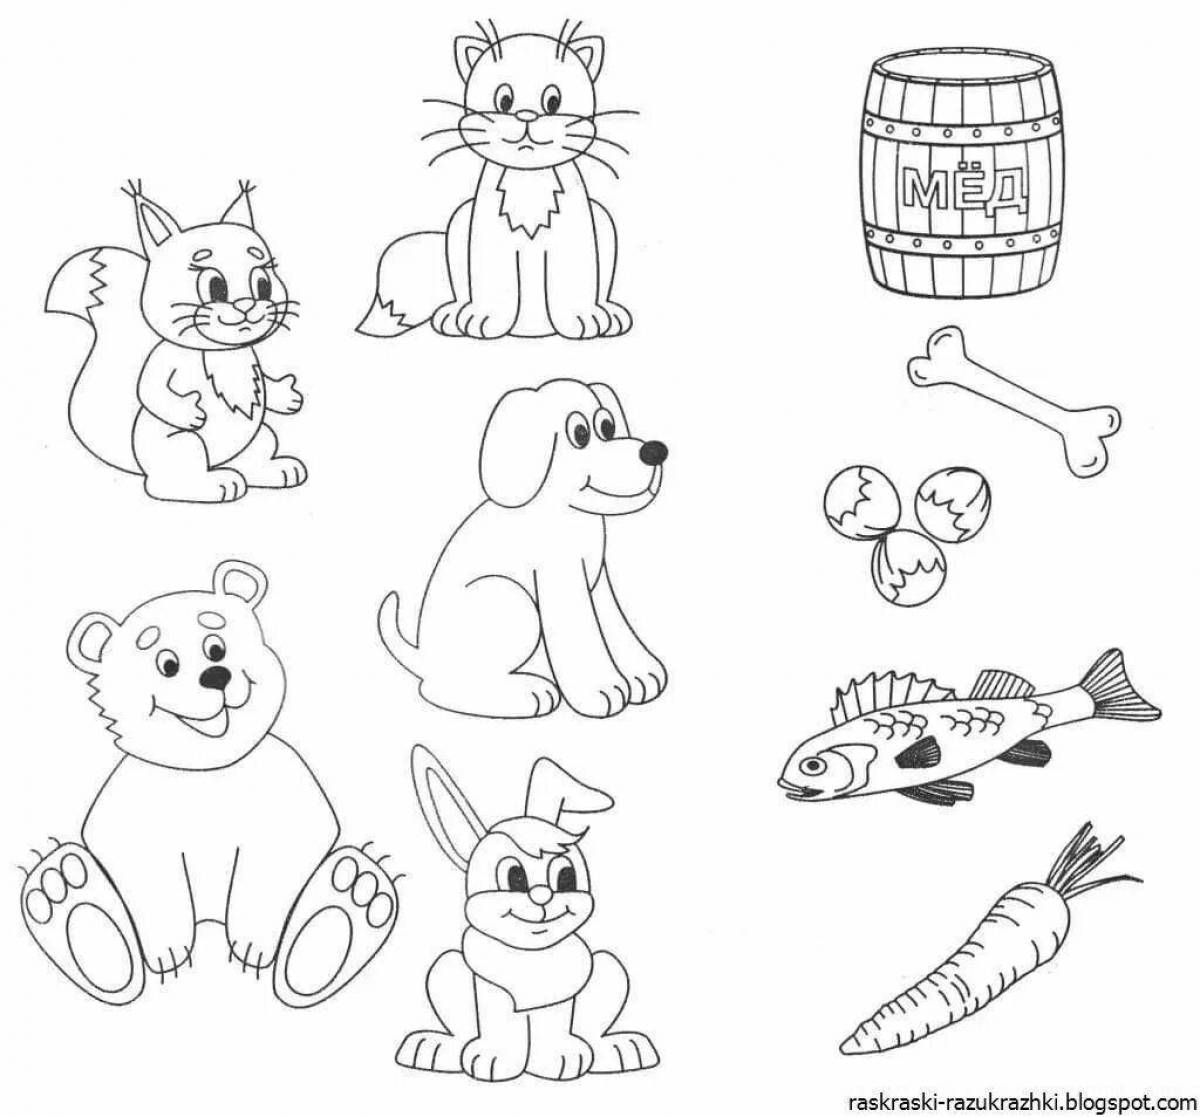 Creative educational coloring book for children 2-3 years old